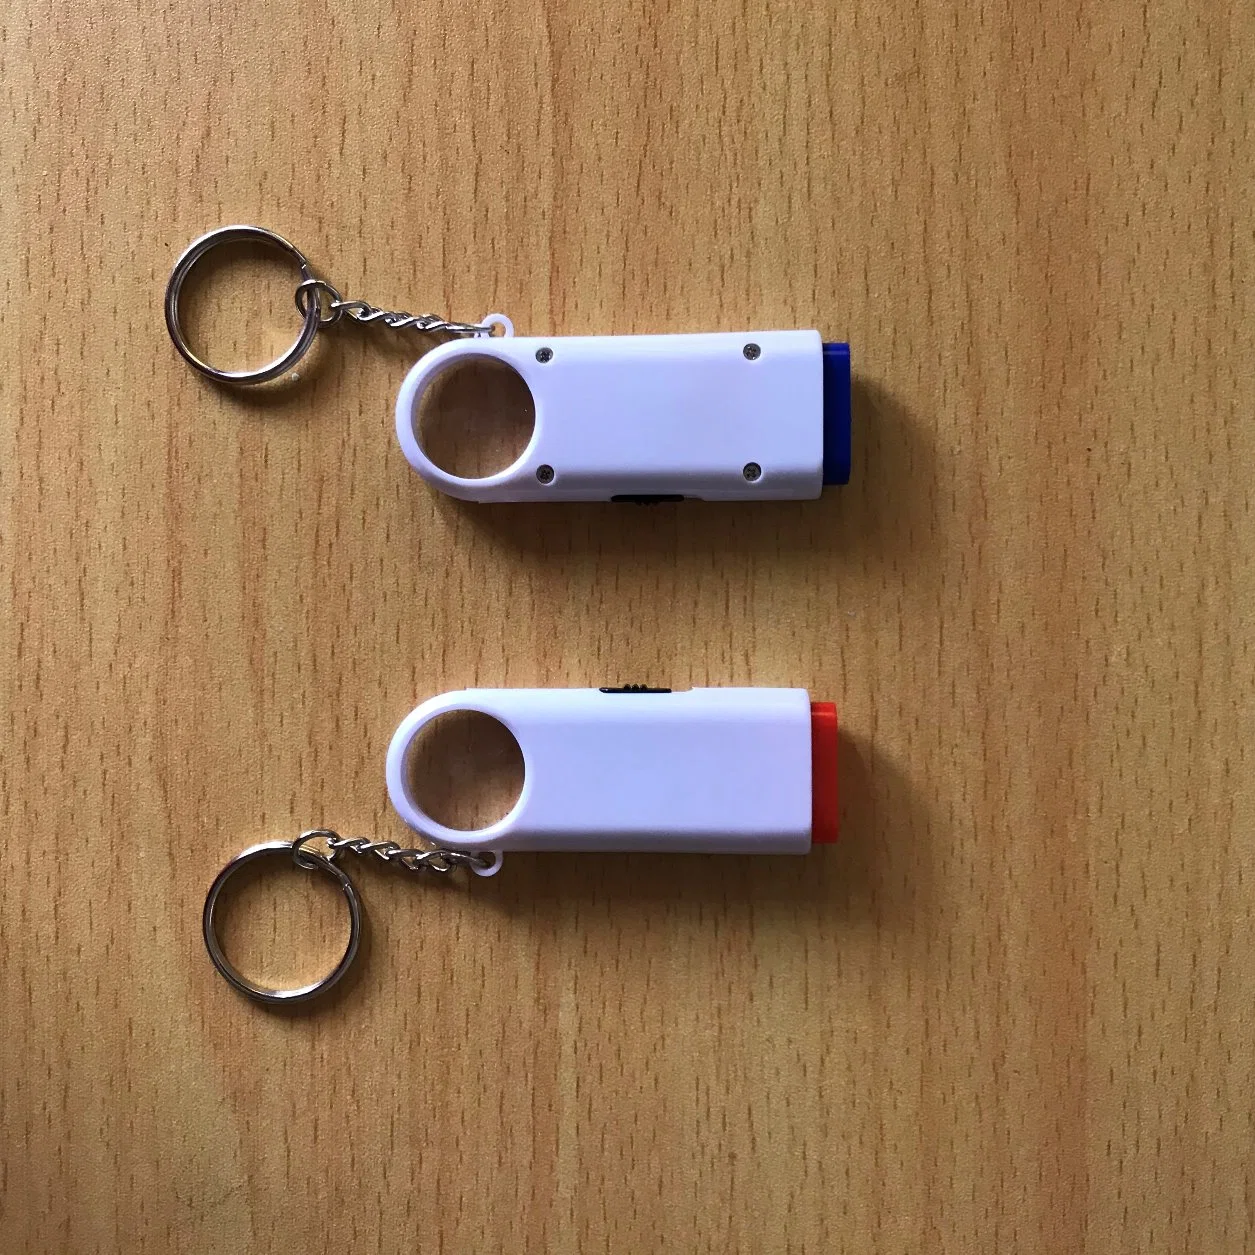 Promotion Gift LED Light Keychain with Magnifier